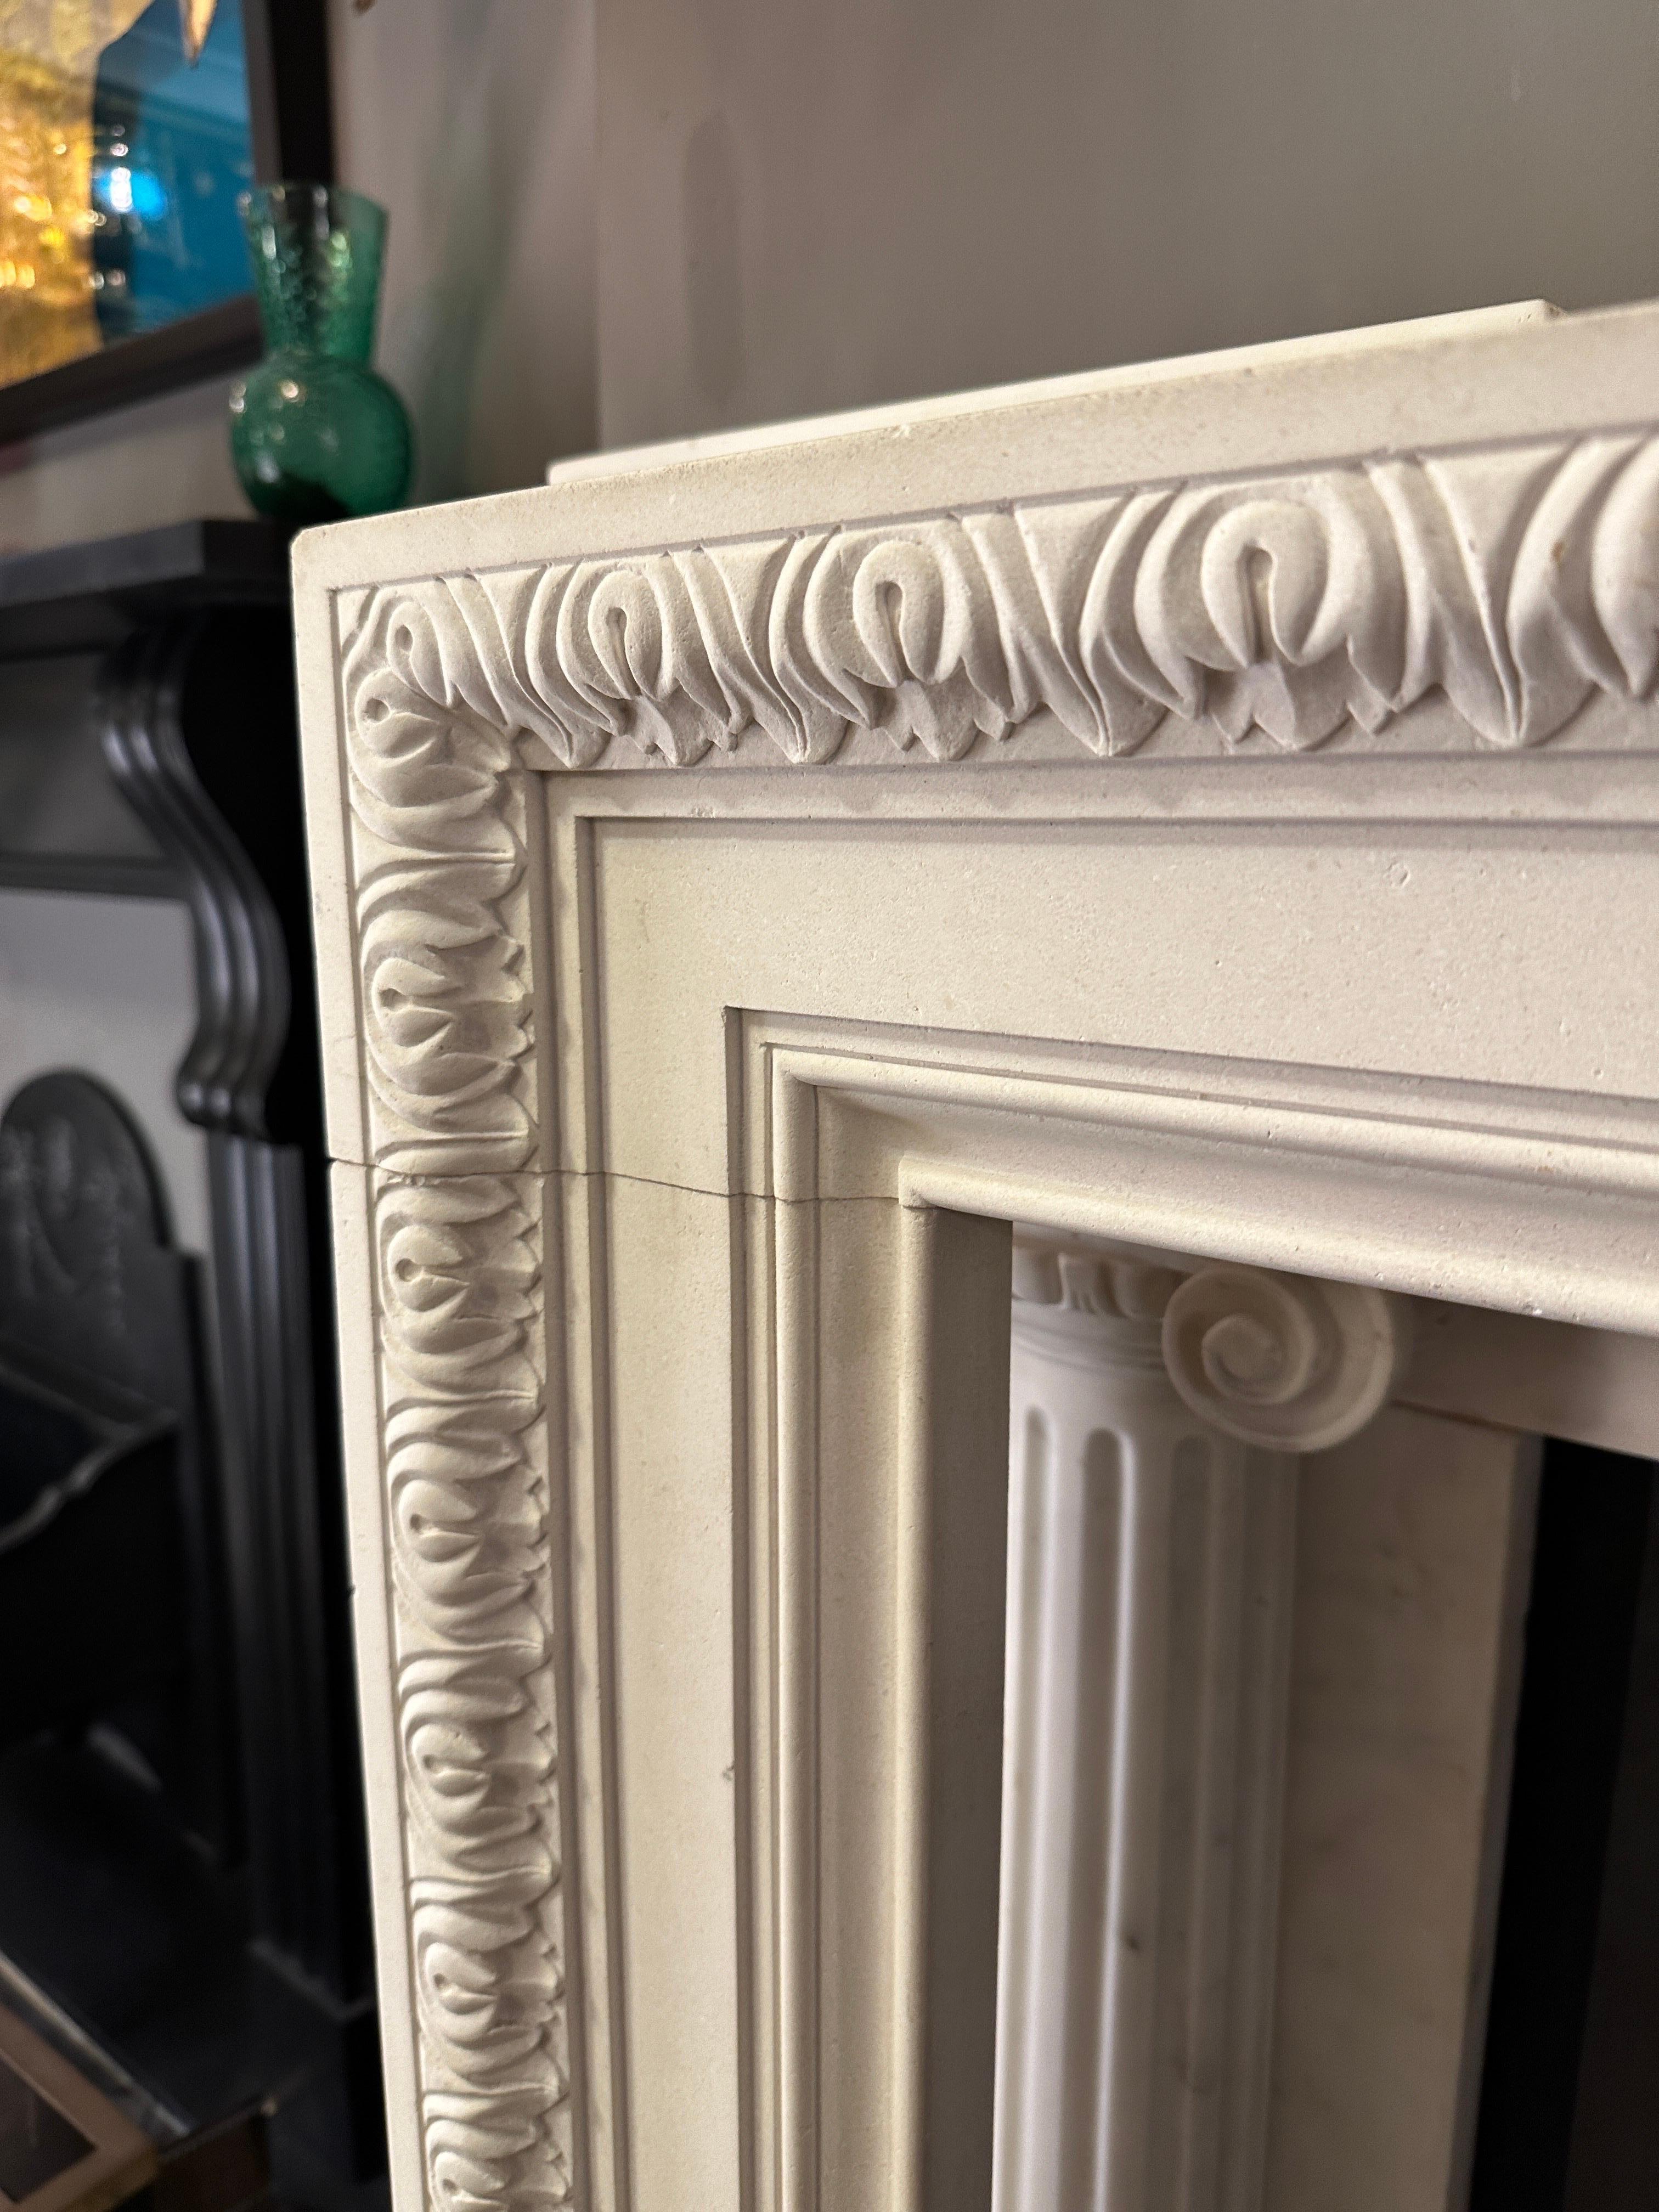 European A Reclaimed George II Style English Fireplace Mantel In Limestone For Sale